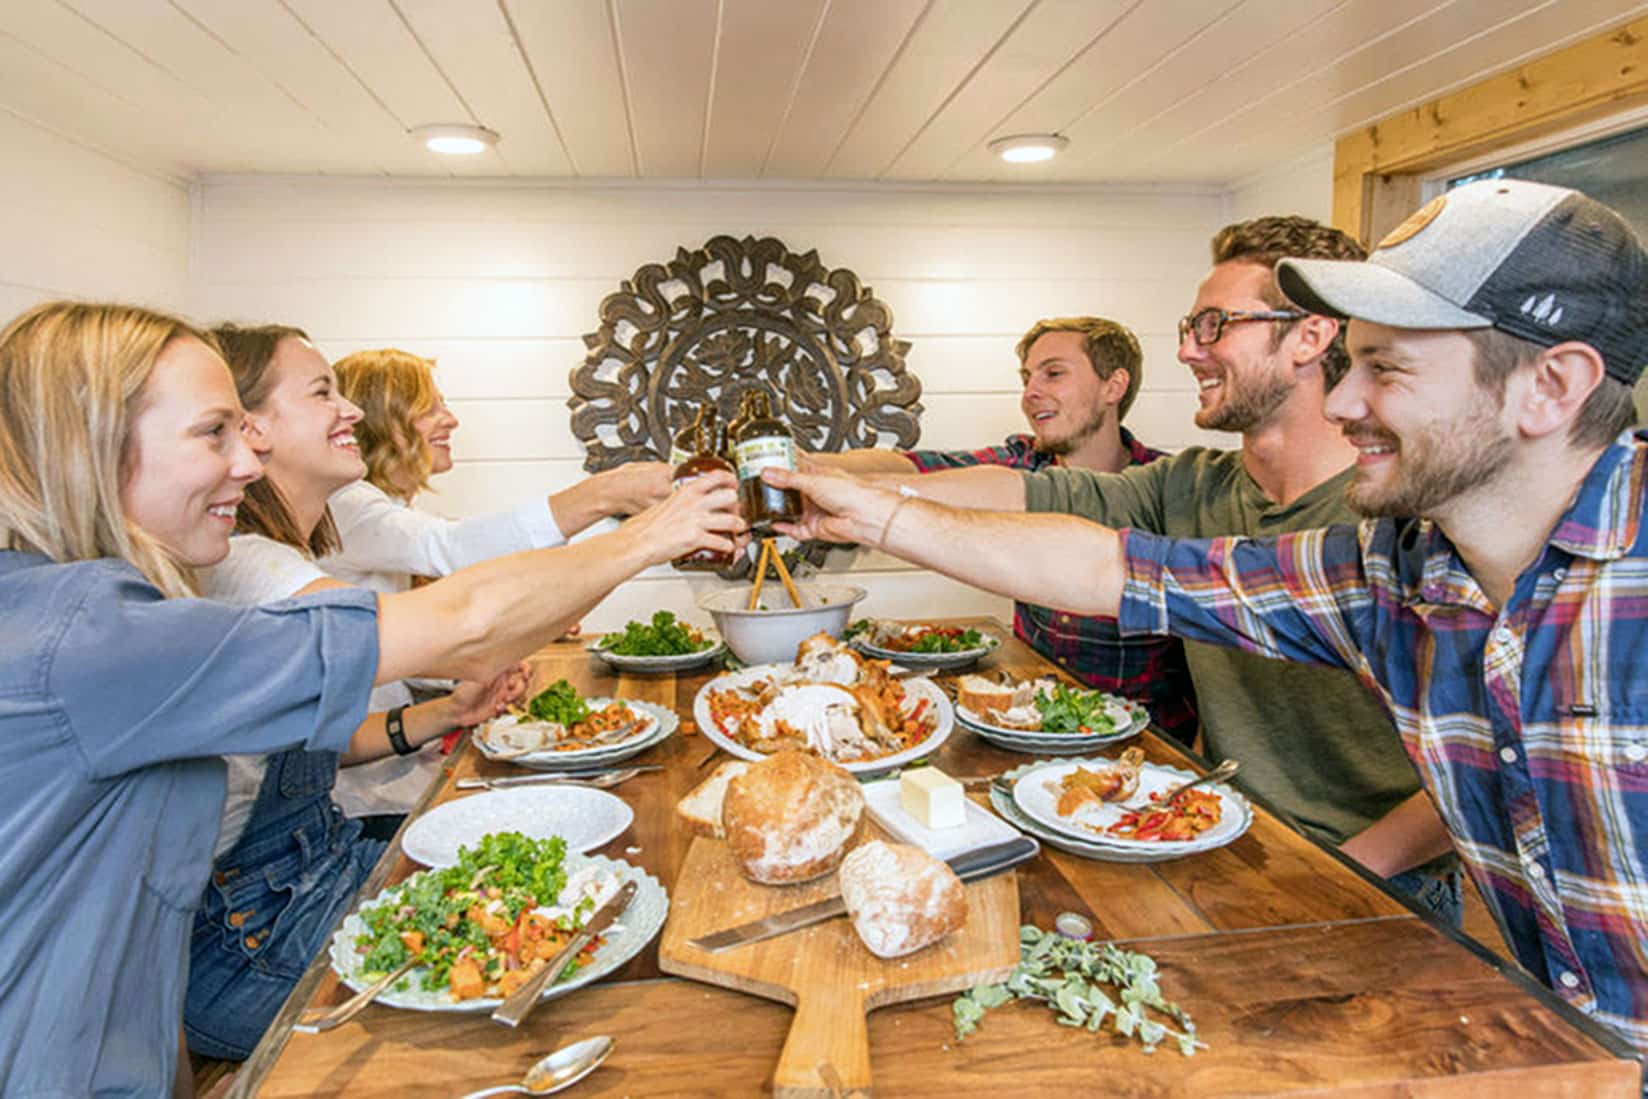 Tiny Heirloom team cheers over dinner table in a tiny home they built